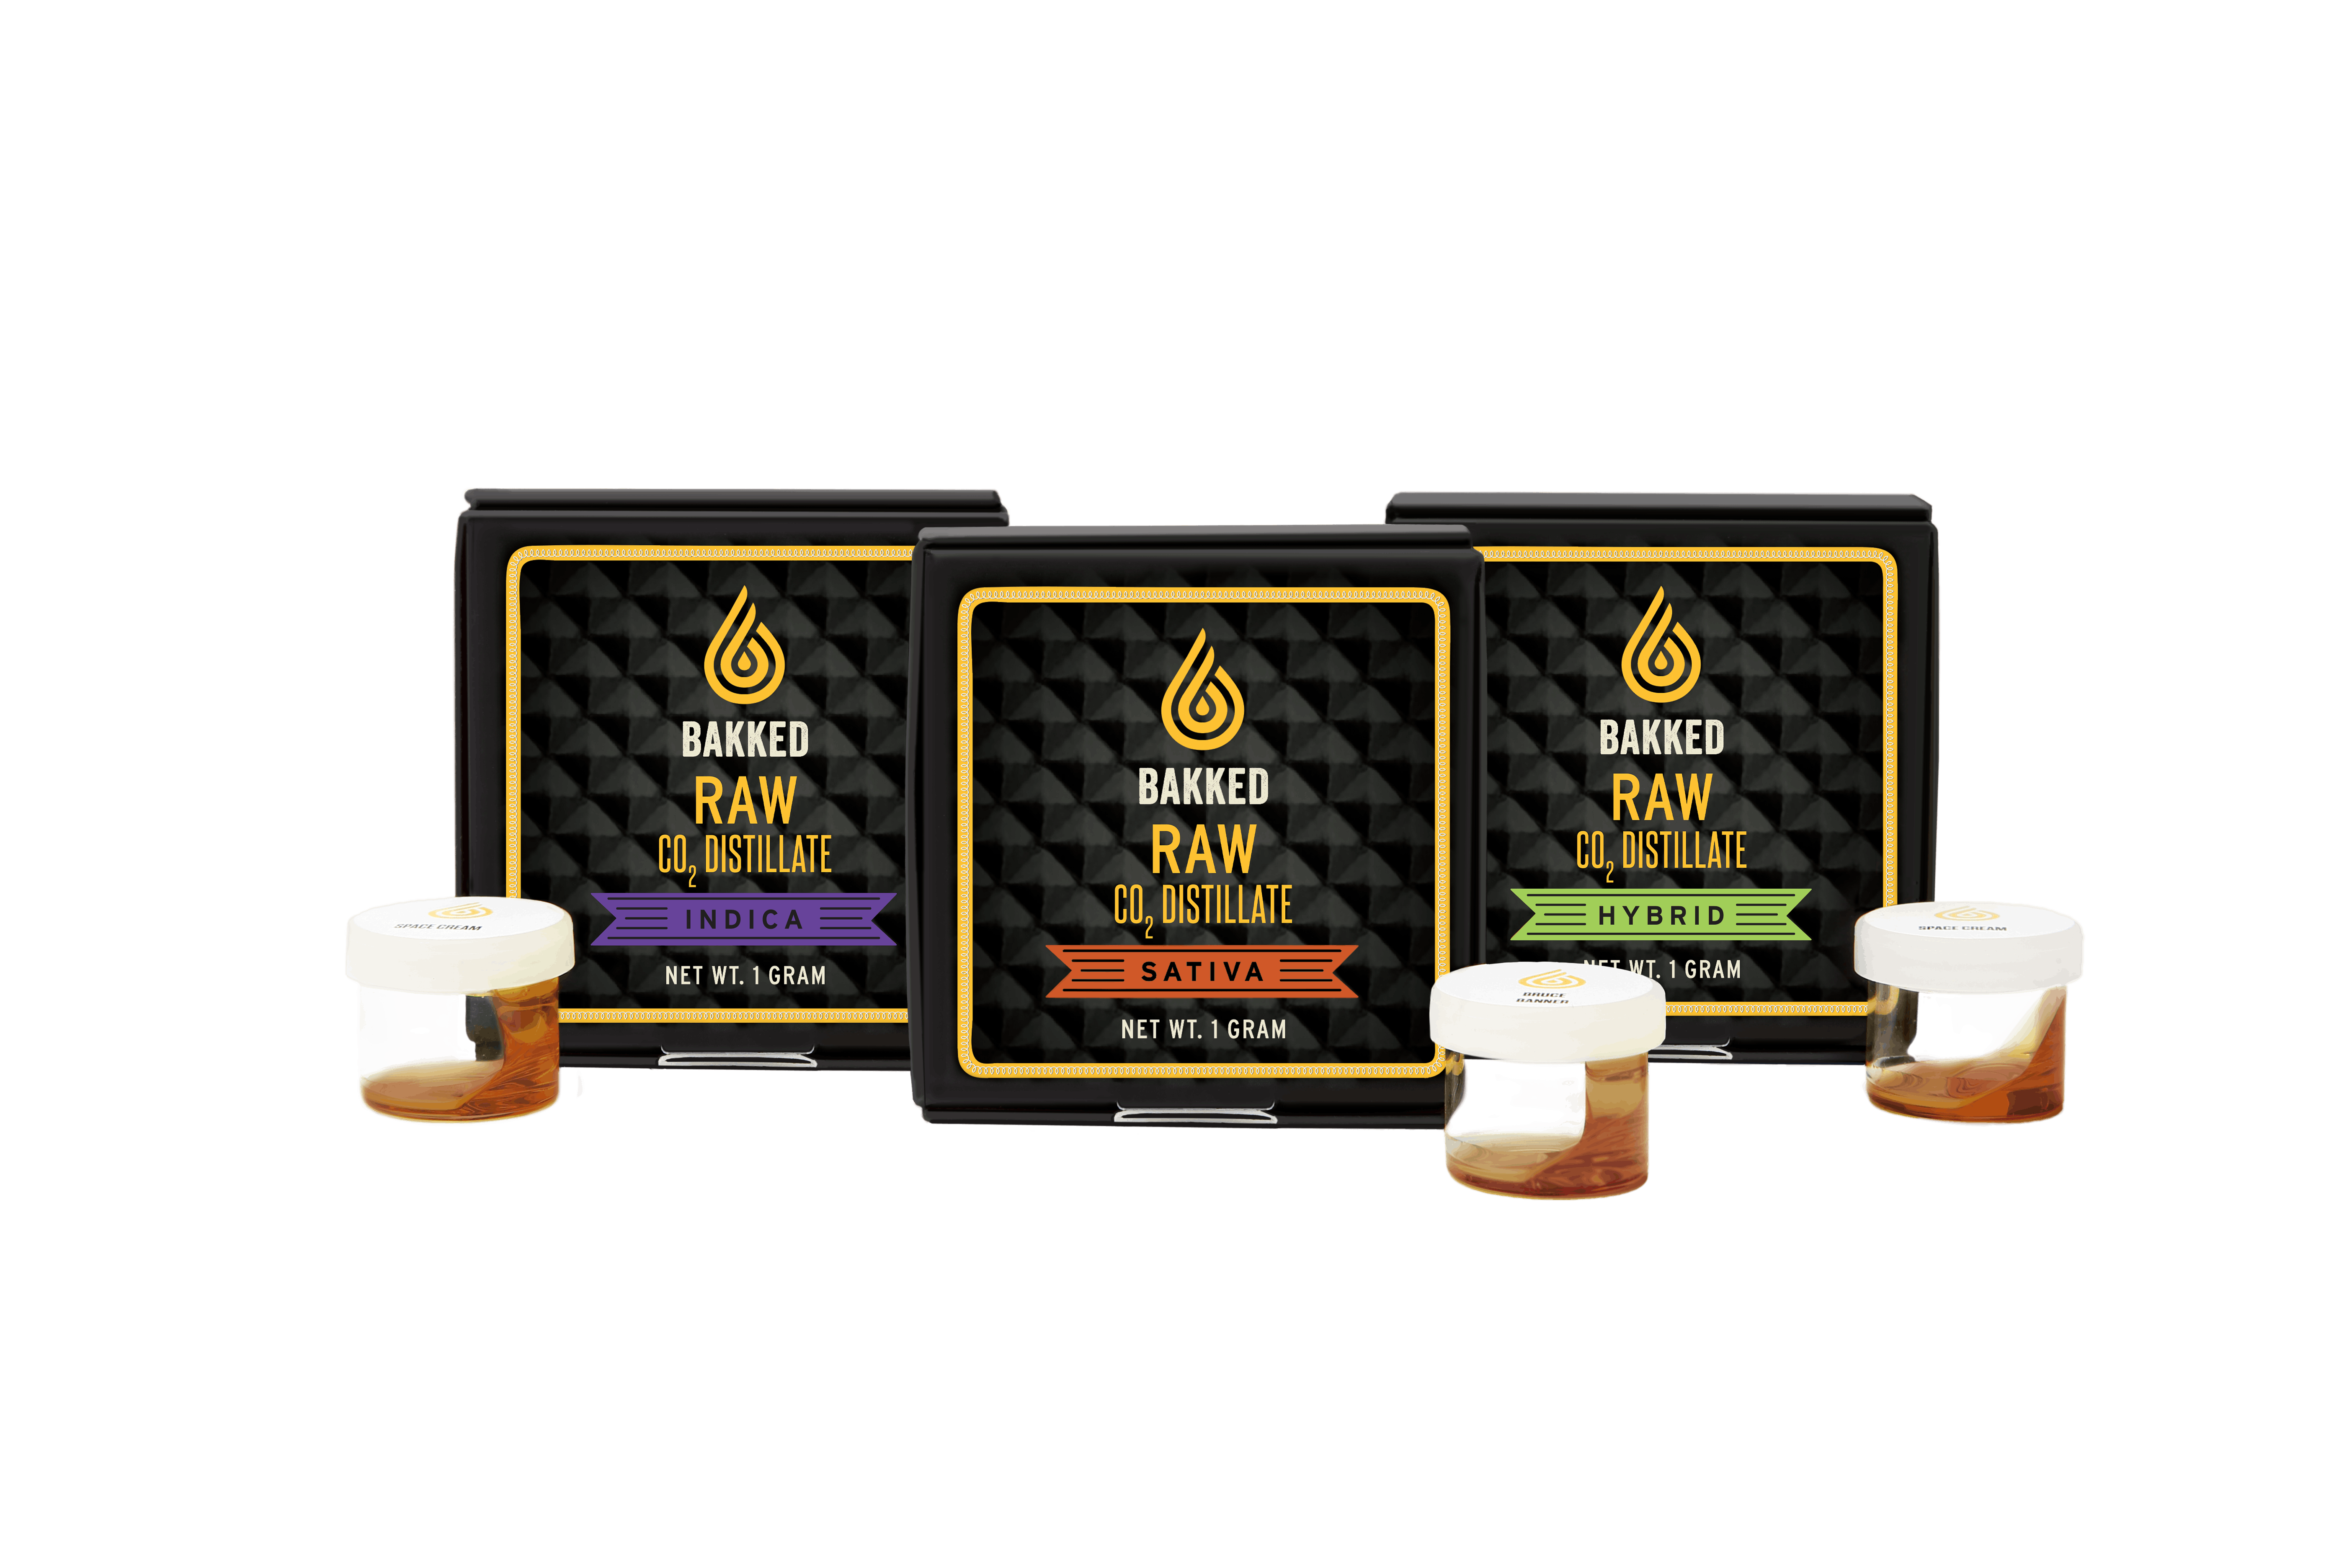 concentrate-bakked-hybrid-raw-co2-distillate